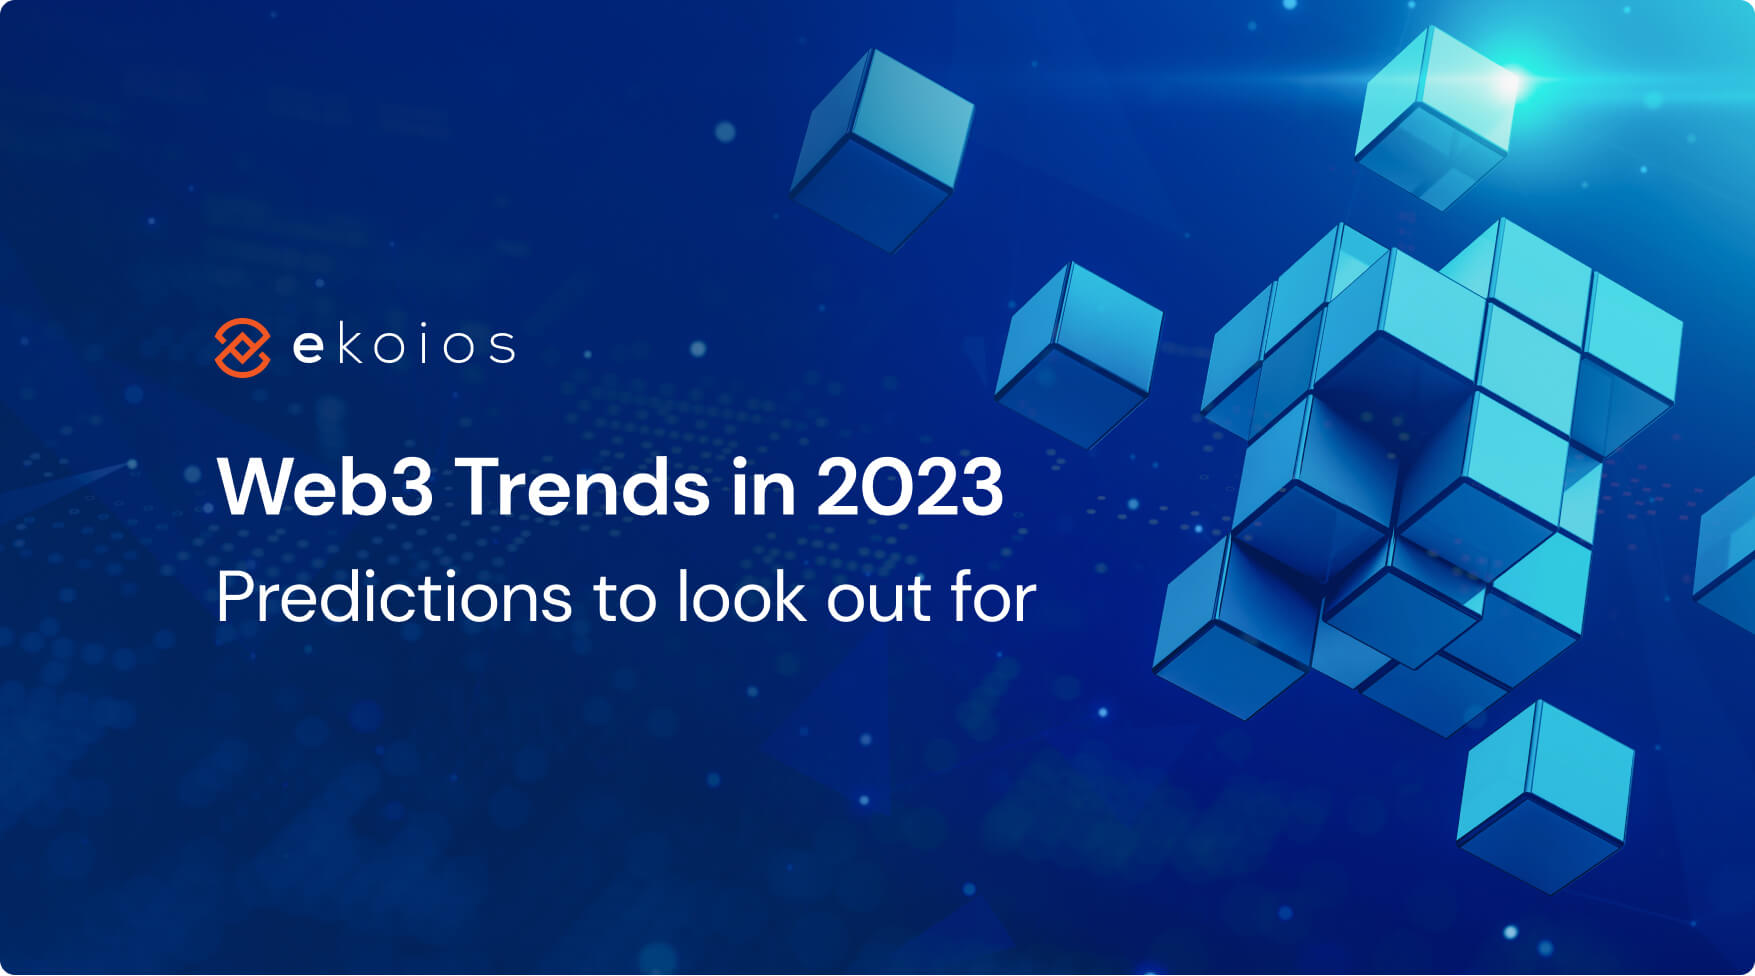 Web3 Trends Forecast for 2023: What to Anticipate